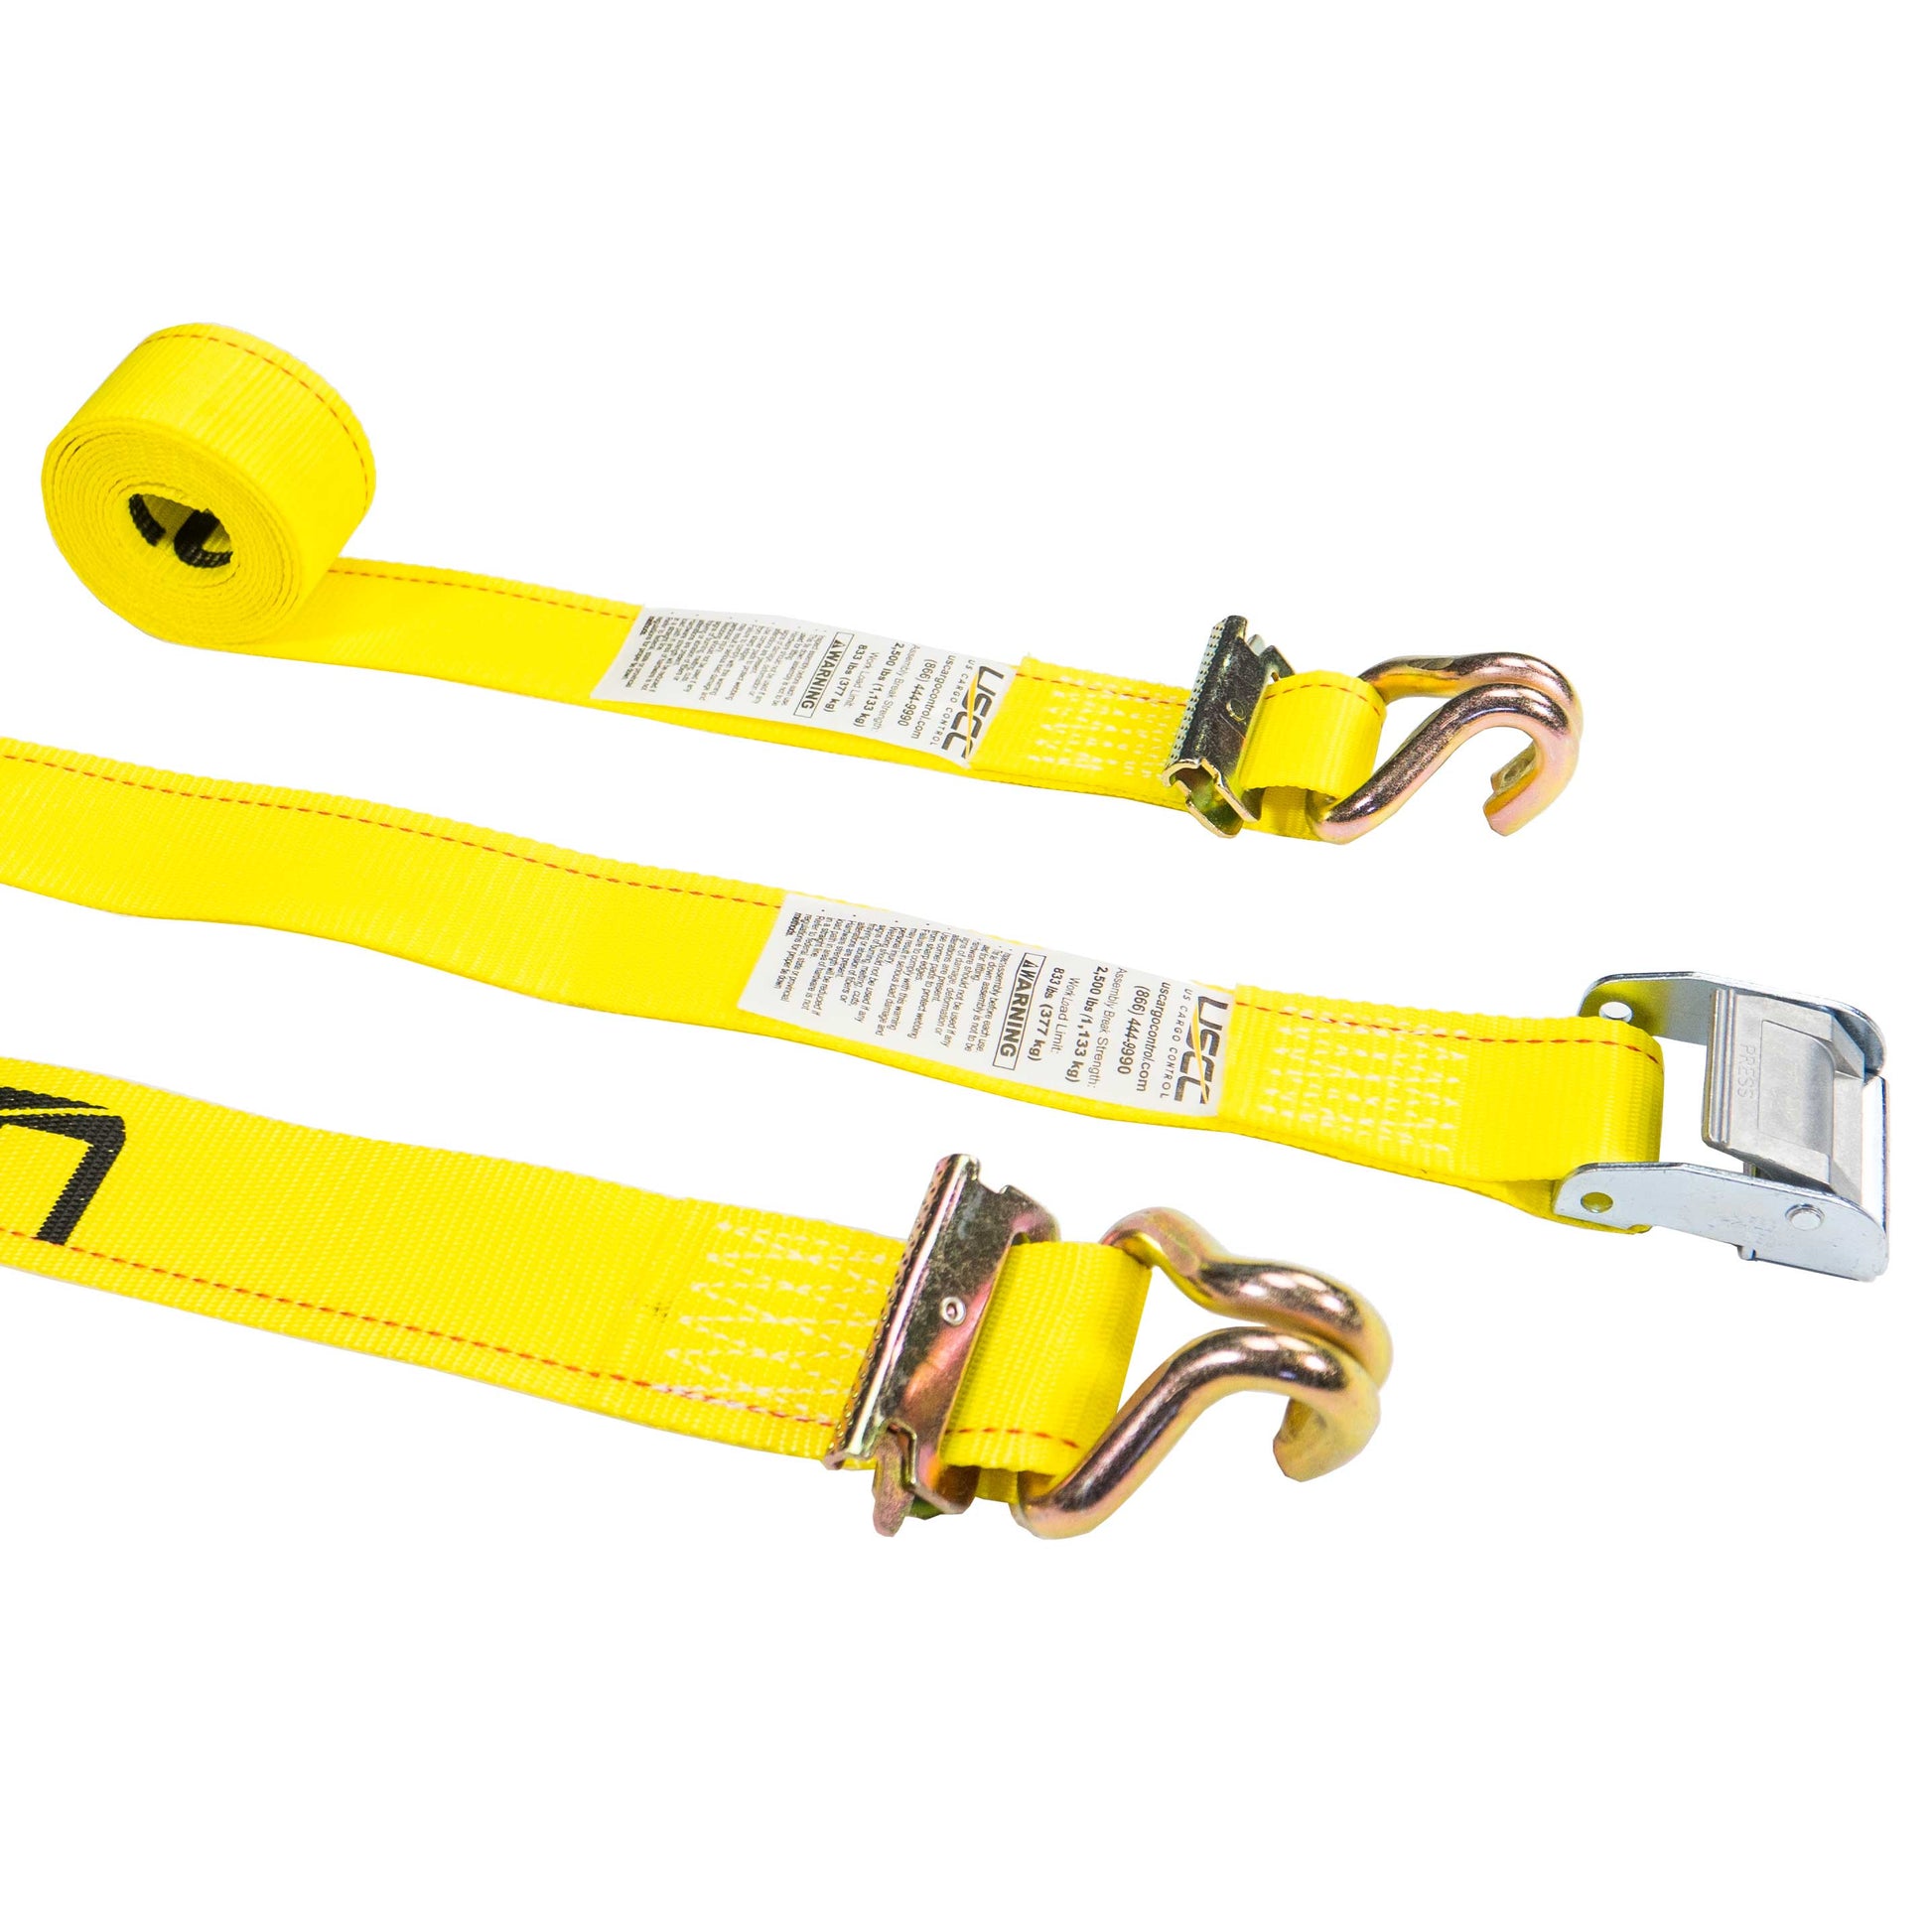 2 foot foot X 12 foot Yellow ETrack Cam Strap wSpring EFittings and Wire Hooks image 1 of 10